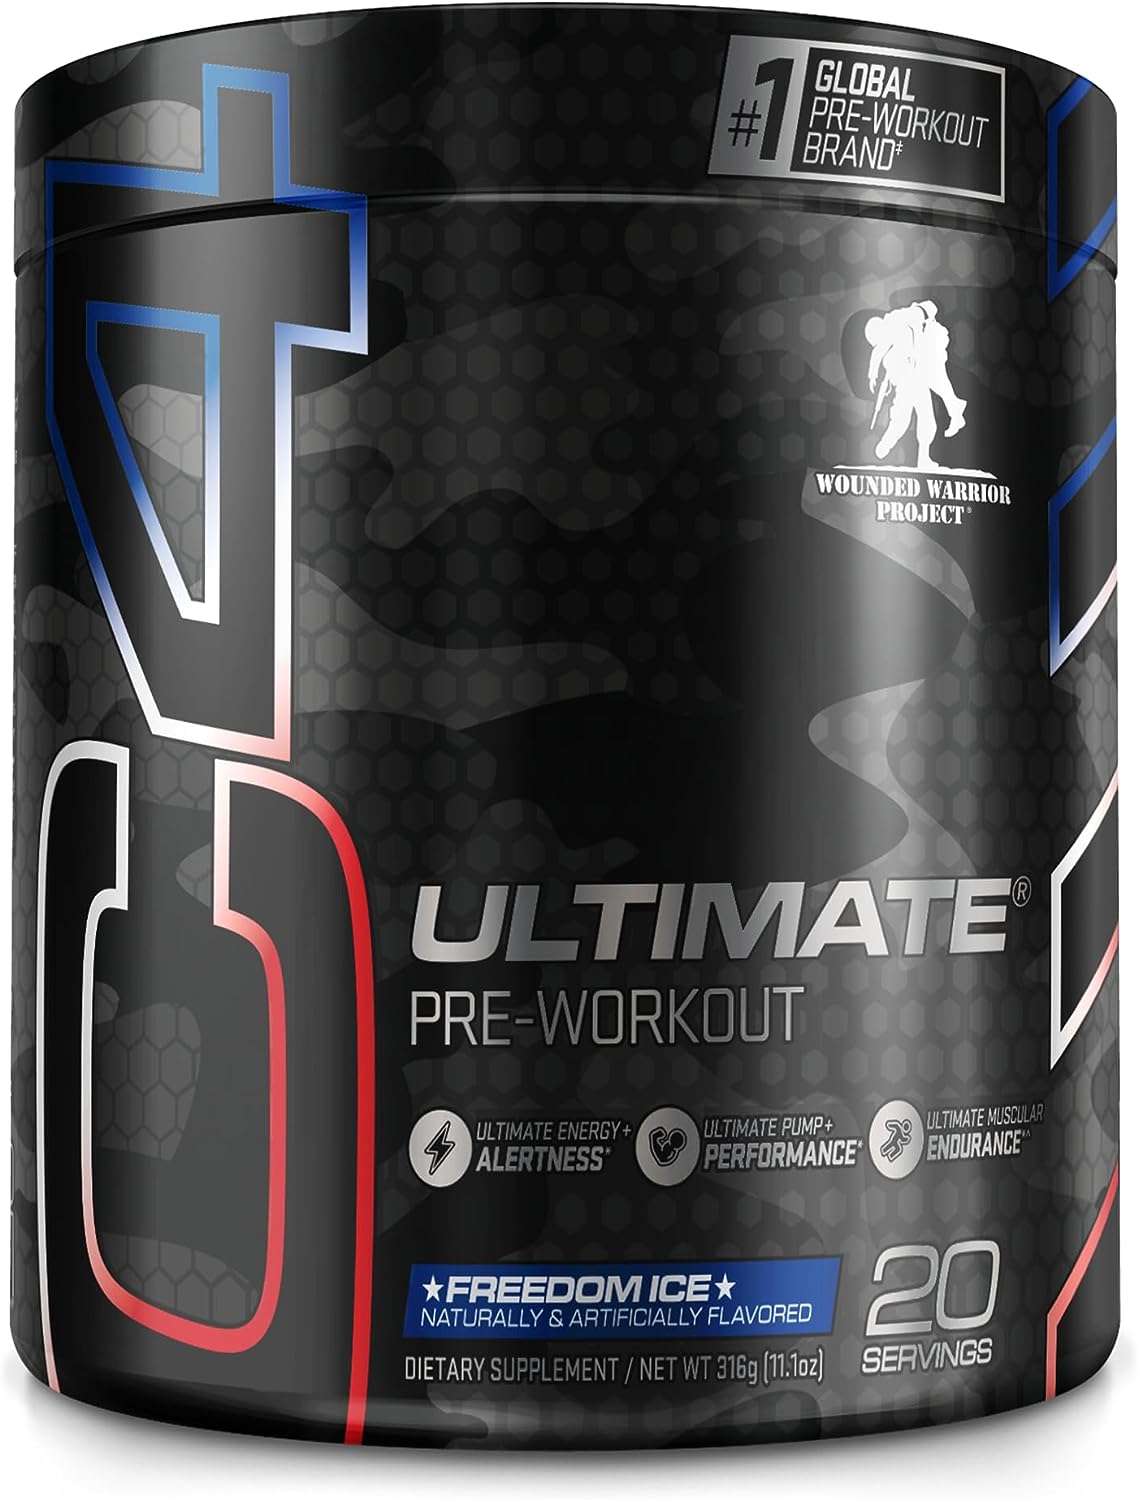 C4 Ultimate x Wounded Warrior Project Pre Workout Powder Freedom Ice - Sugar Free Preworkout Energy Supplement for Men & Women - 300mg Caffeine + 3.2g Beta Alanine + 2 Patented Creatines - 20 Servings